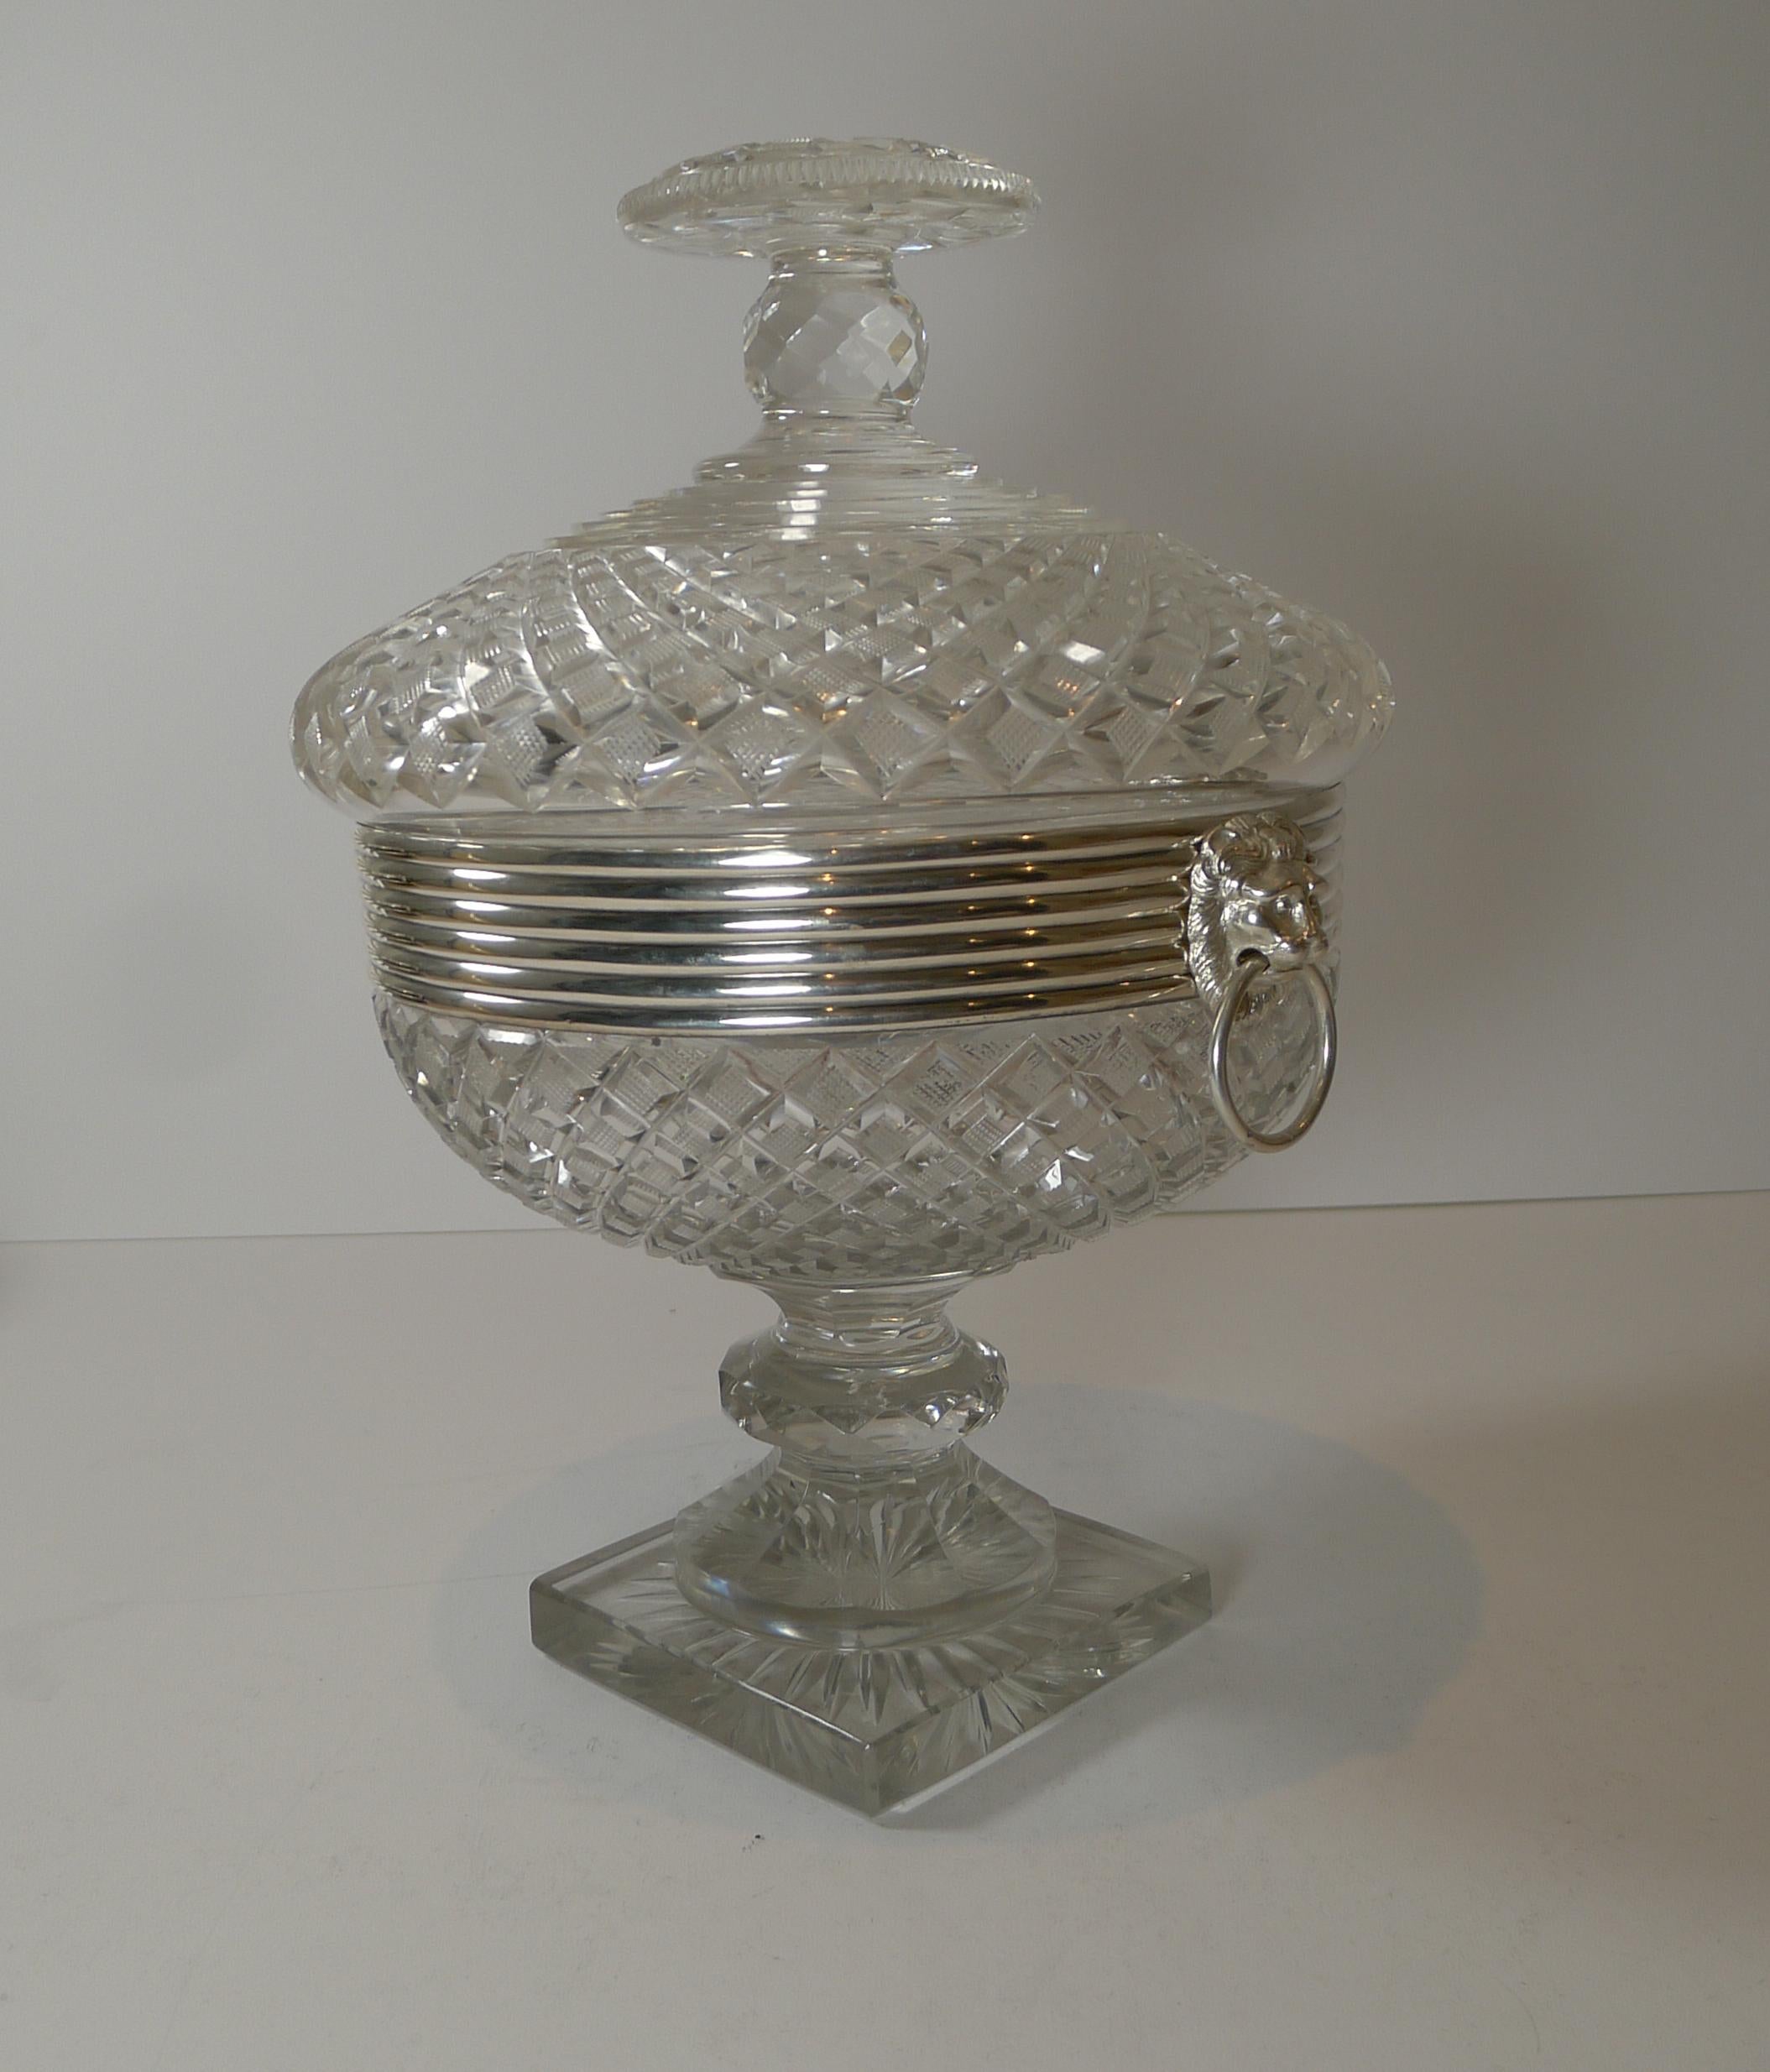 Grand Cut Crystal & Dutch Silver Covered Sweet / Candy Bowl c.1880 For Sale 11